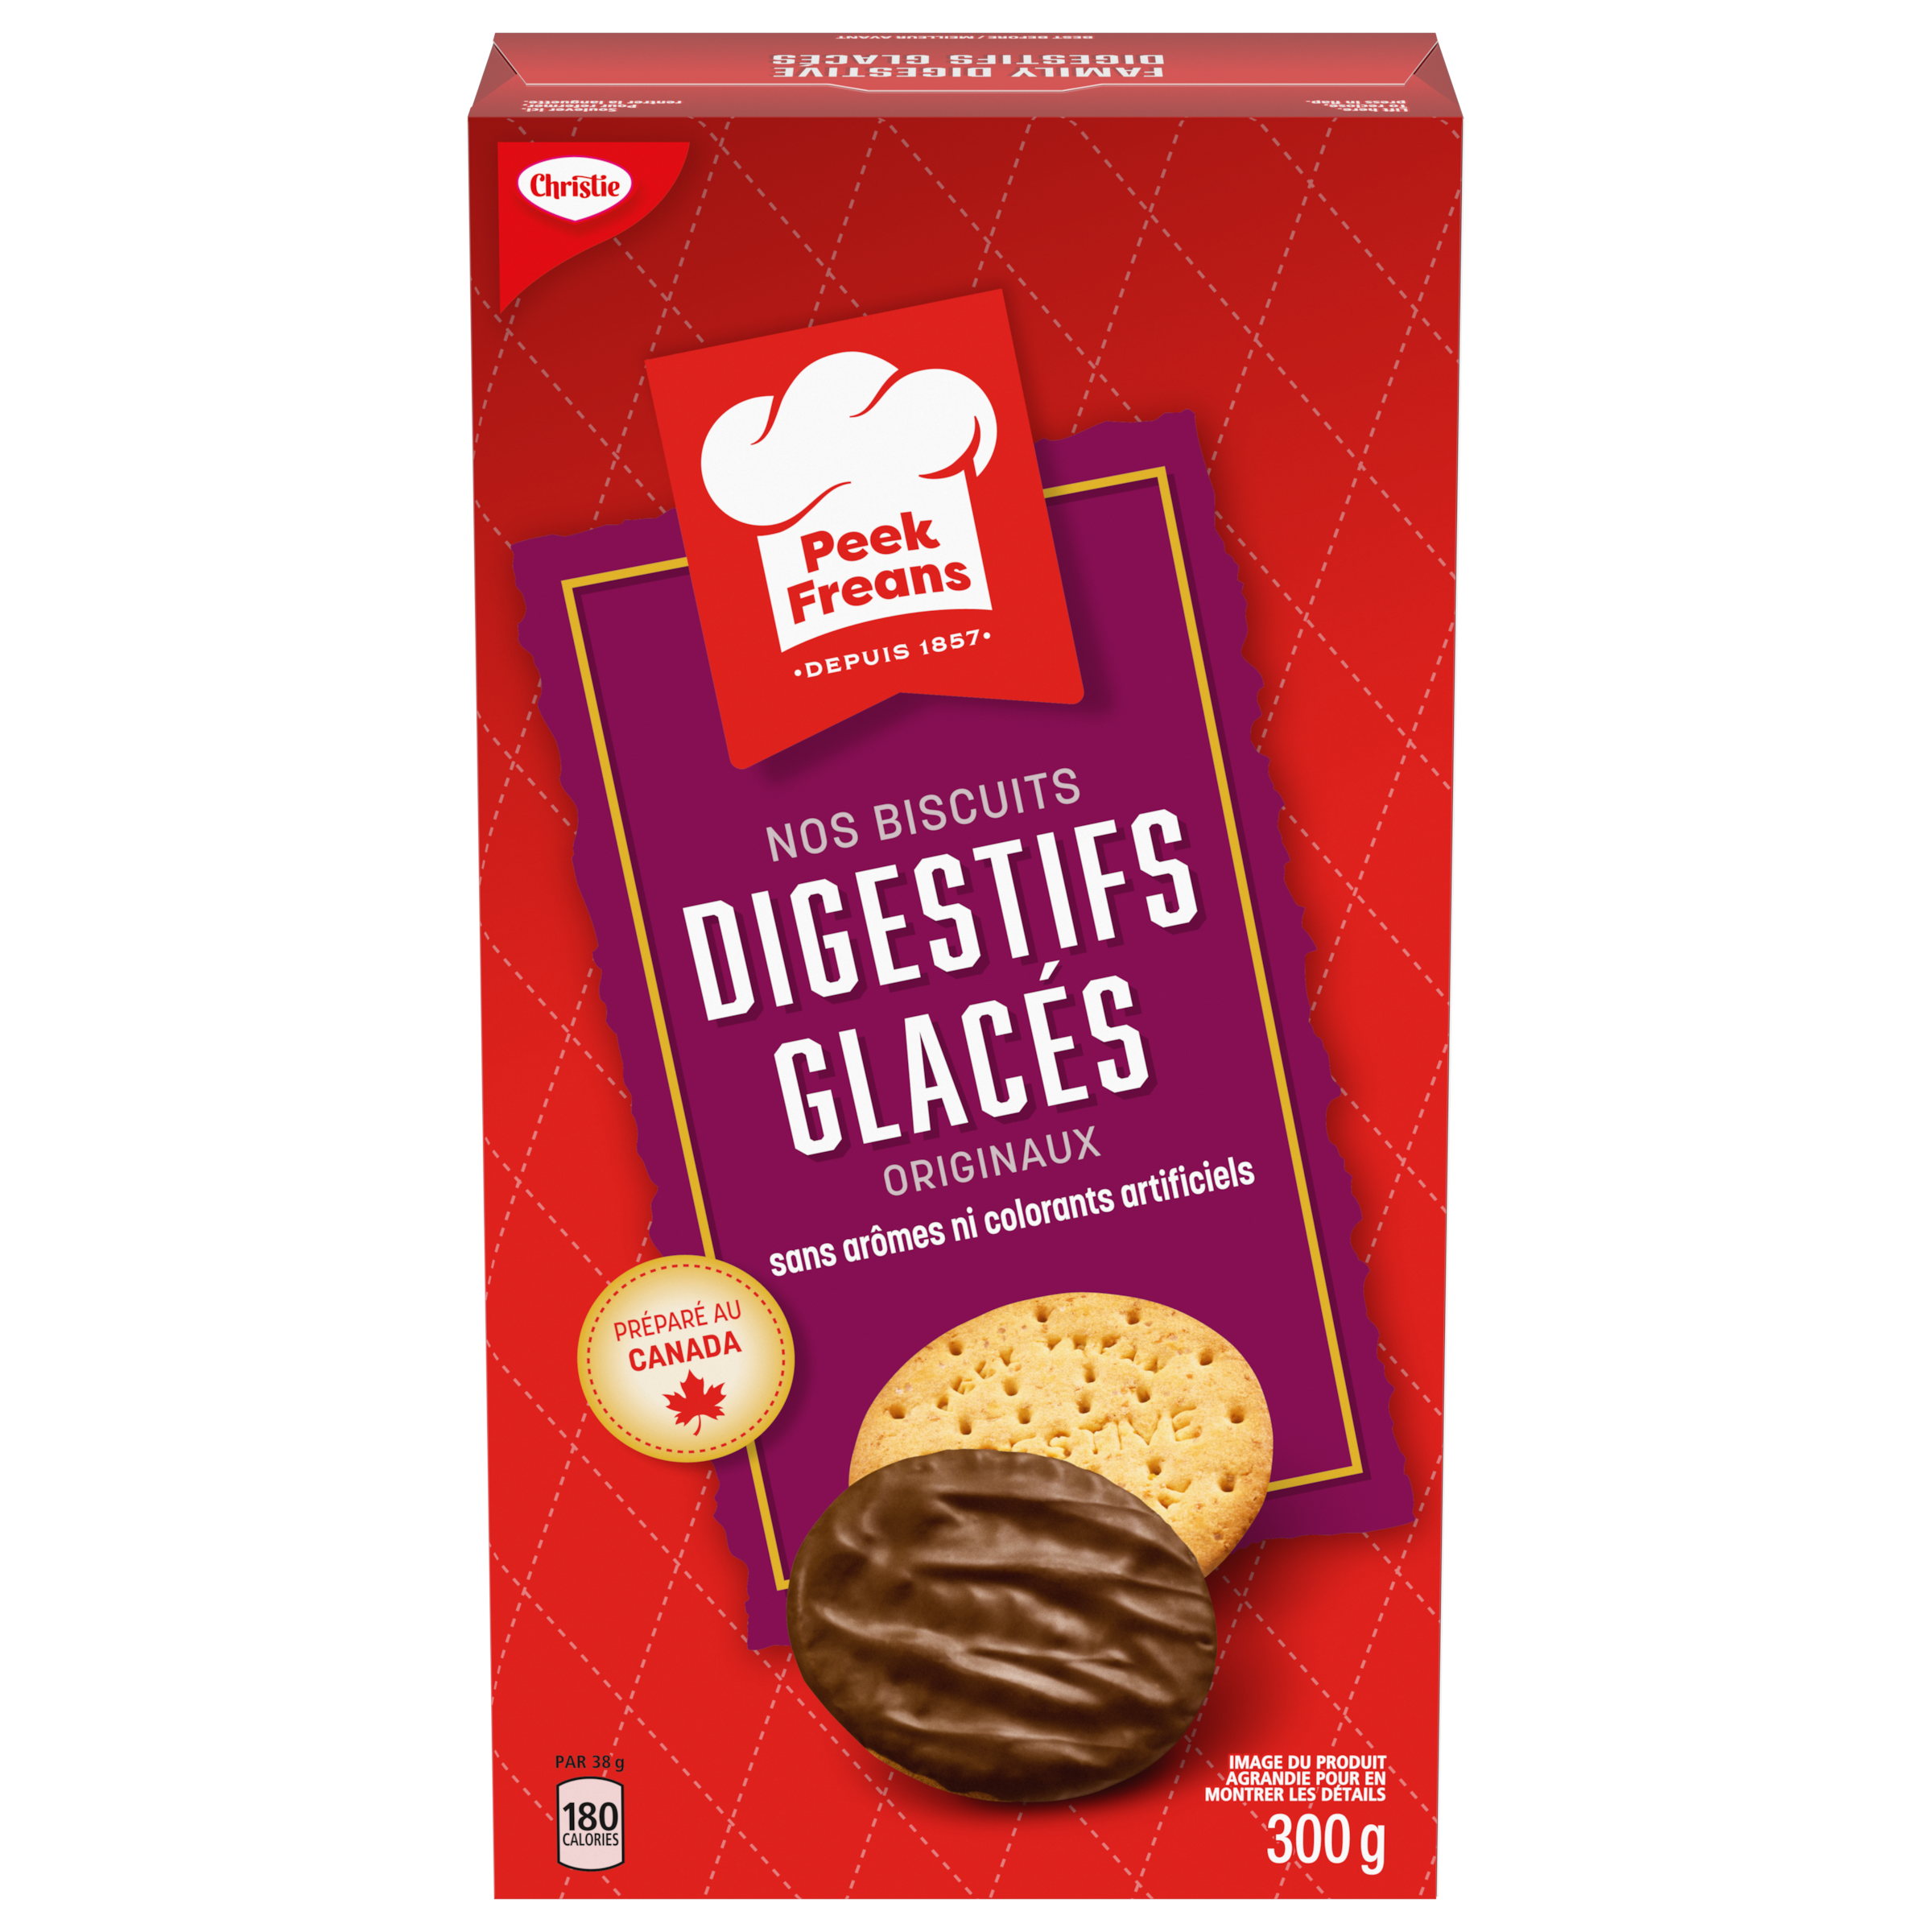 Peek Freans Family Digestive Biscuit, 300g 